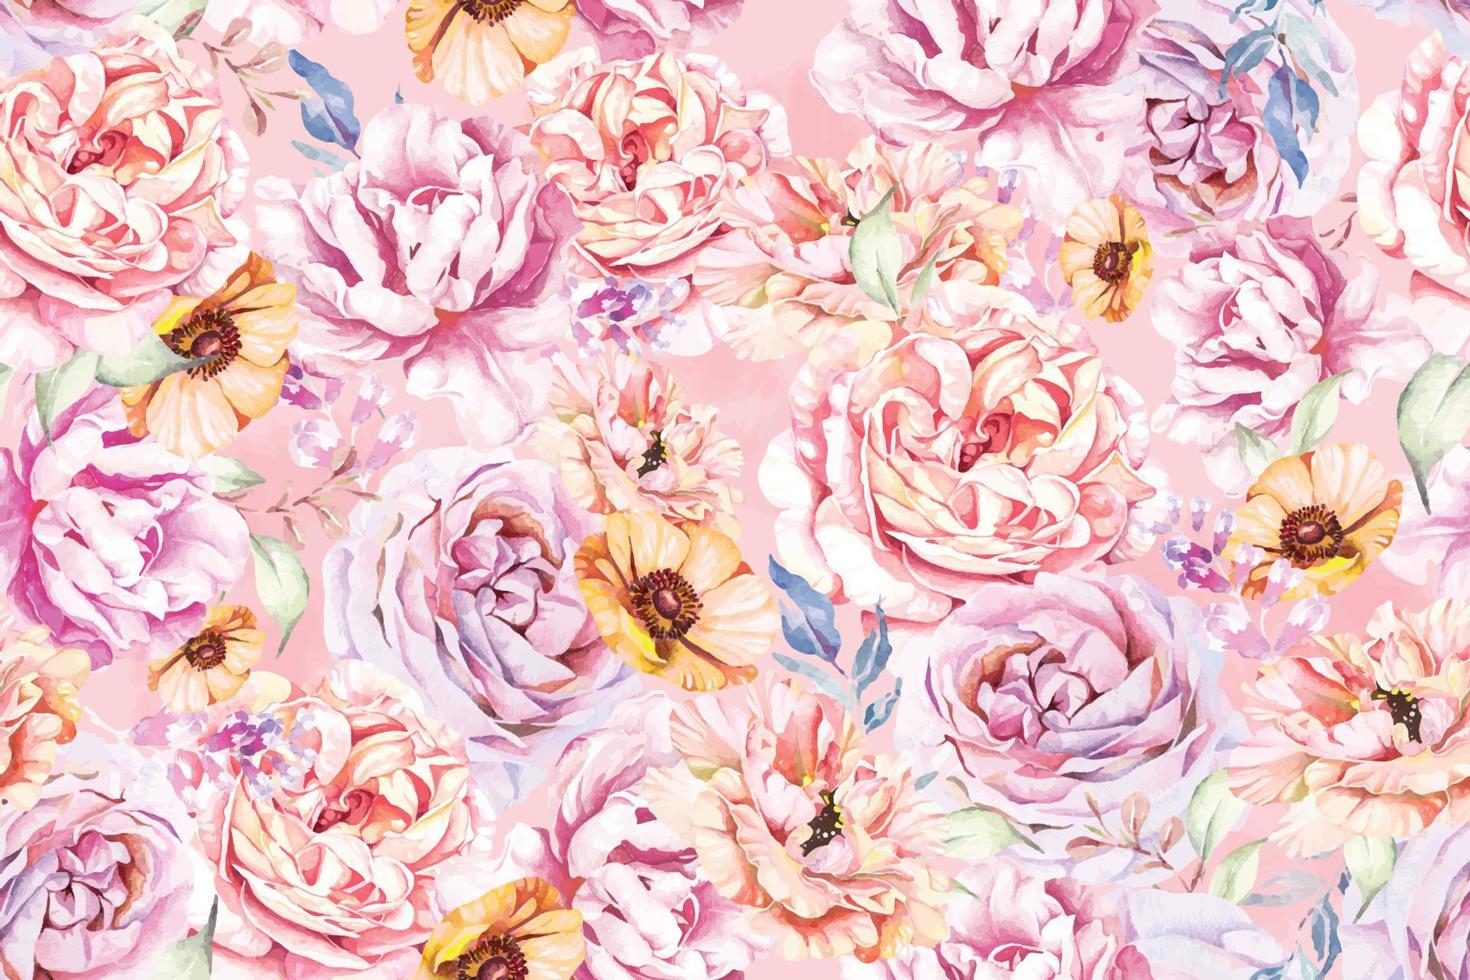 Seamless pattern of rose and blooming flowers painted in watercolor on white background. Designed for fabric luxurious and wallpaper, vintage style.Hand drawn botanical floral pattern vector